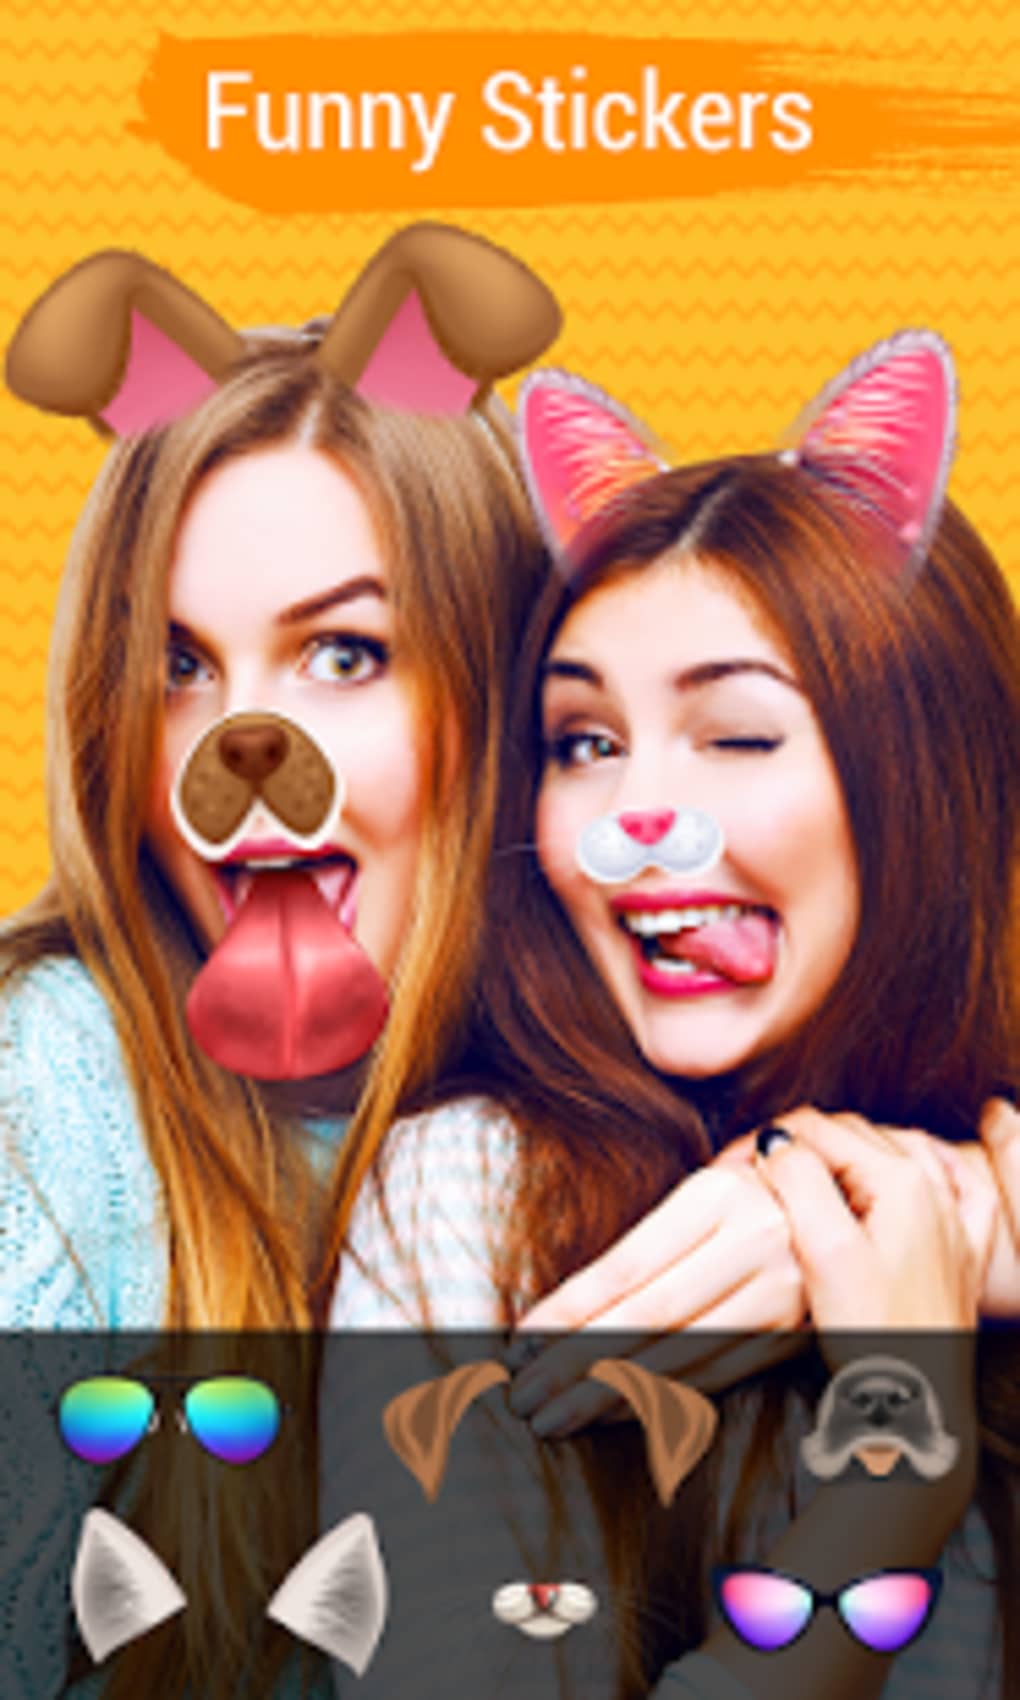 Apus Camera Hd Camera Editor Collage Maker Apk For Android